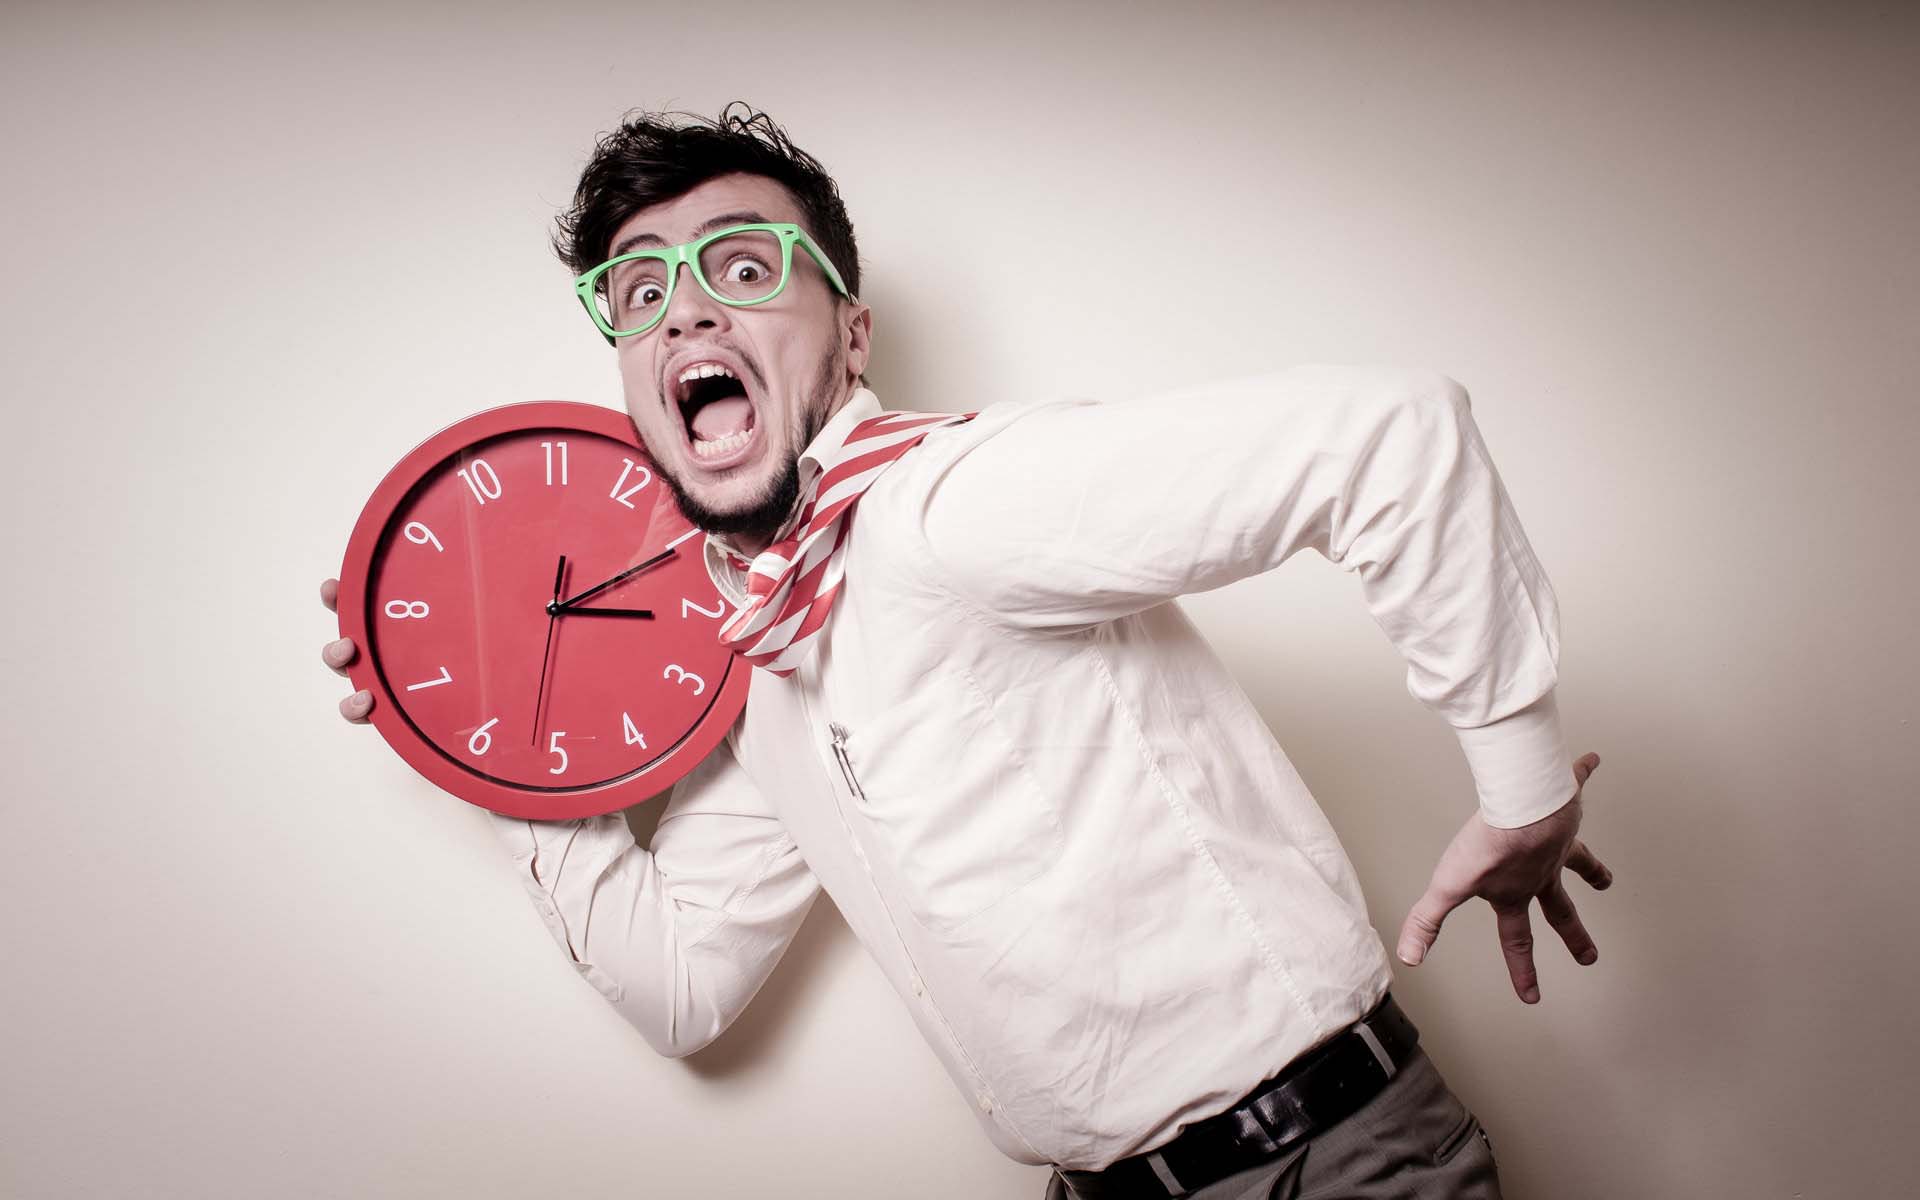 funny businessman with wall clock